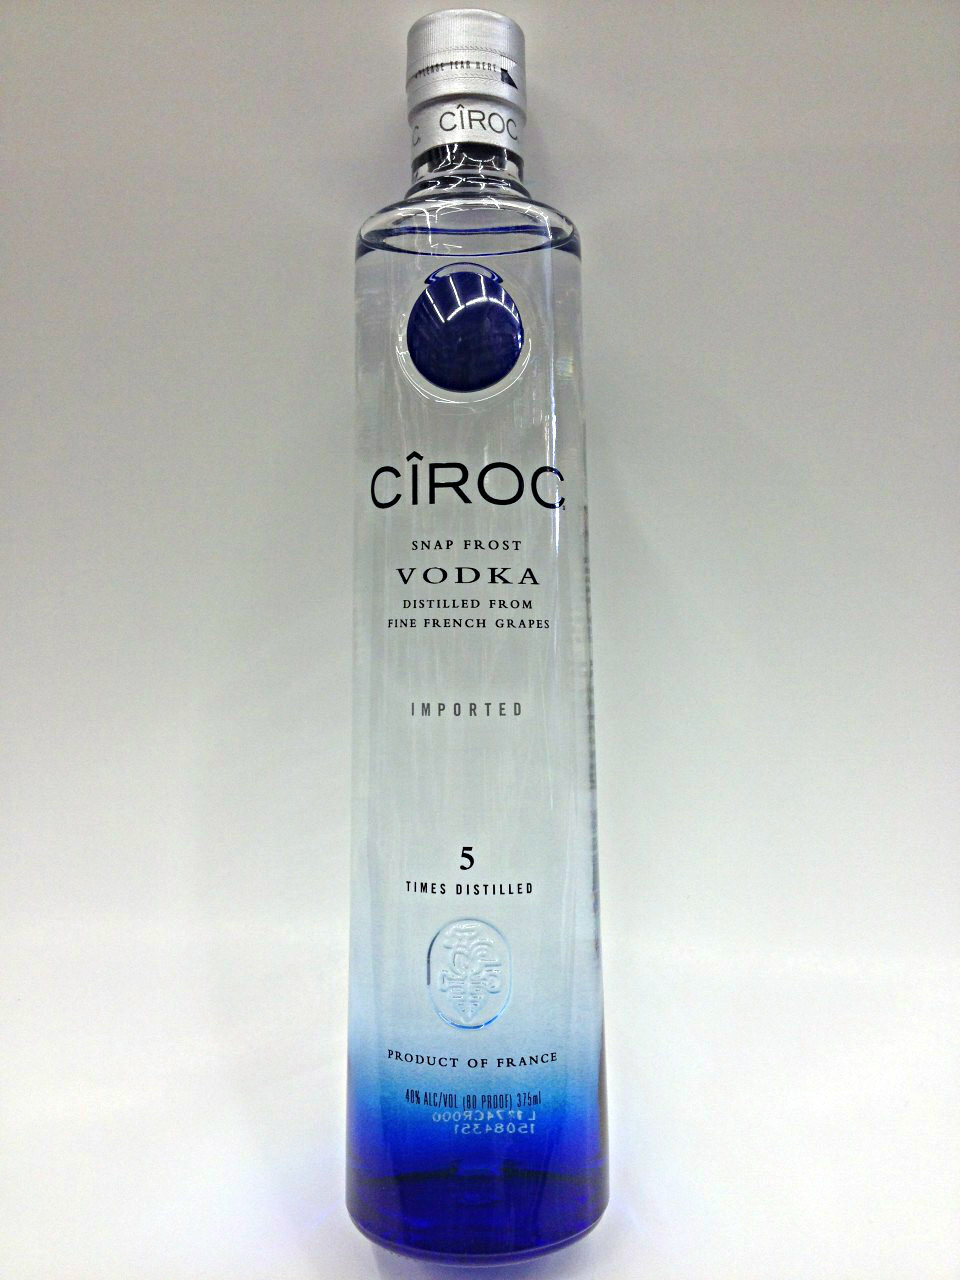 Does flavored ciroc have sugar